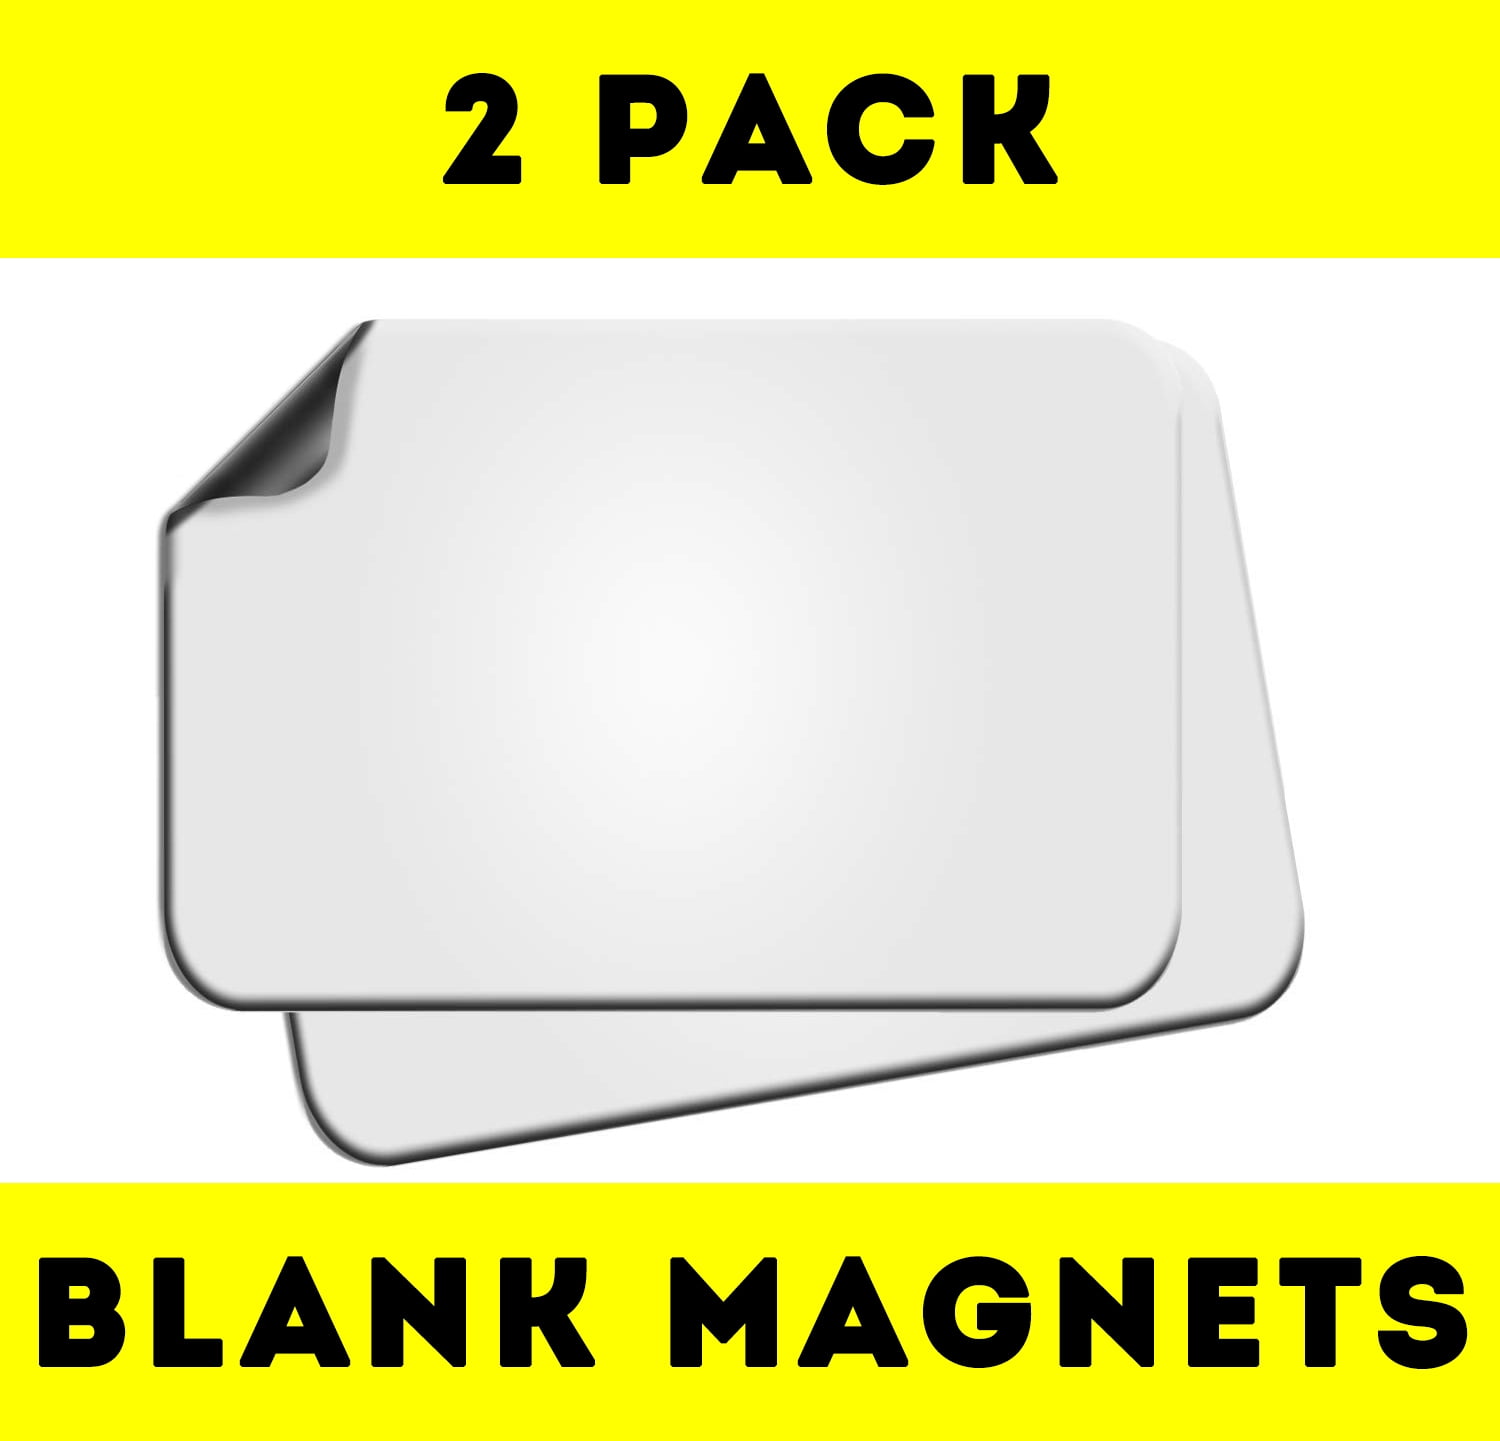 2 Pack of 18x12 Blank Magnets with Rounded Corners, White, Commercial or  Marketing Vehicles/Cars